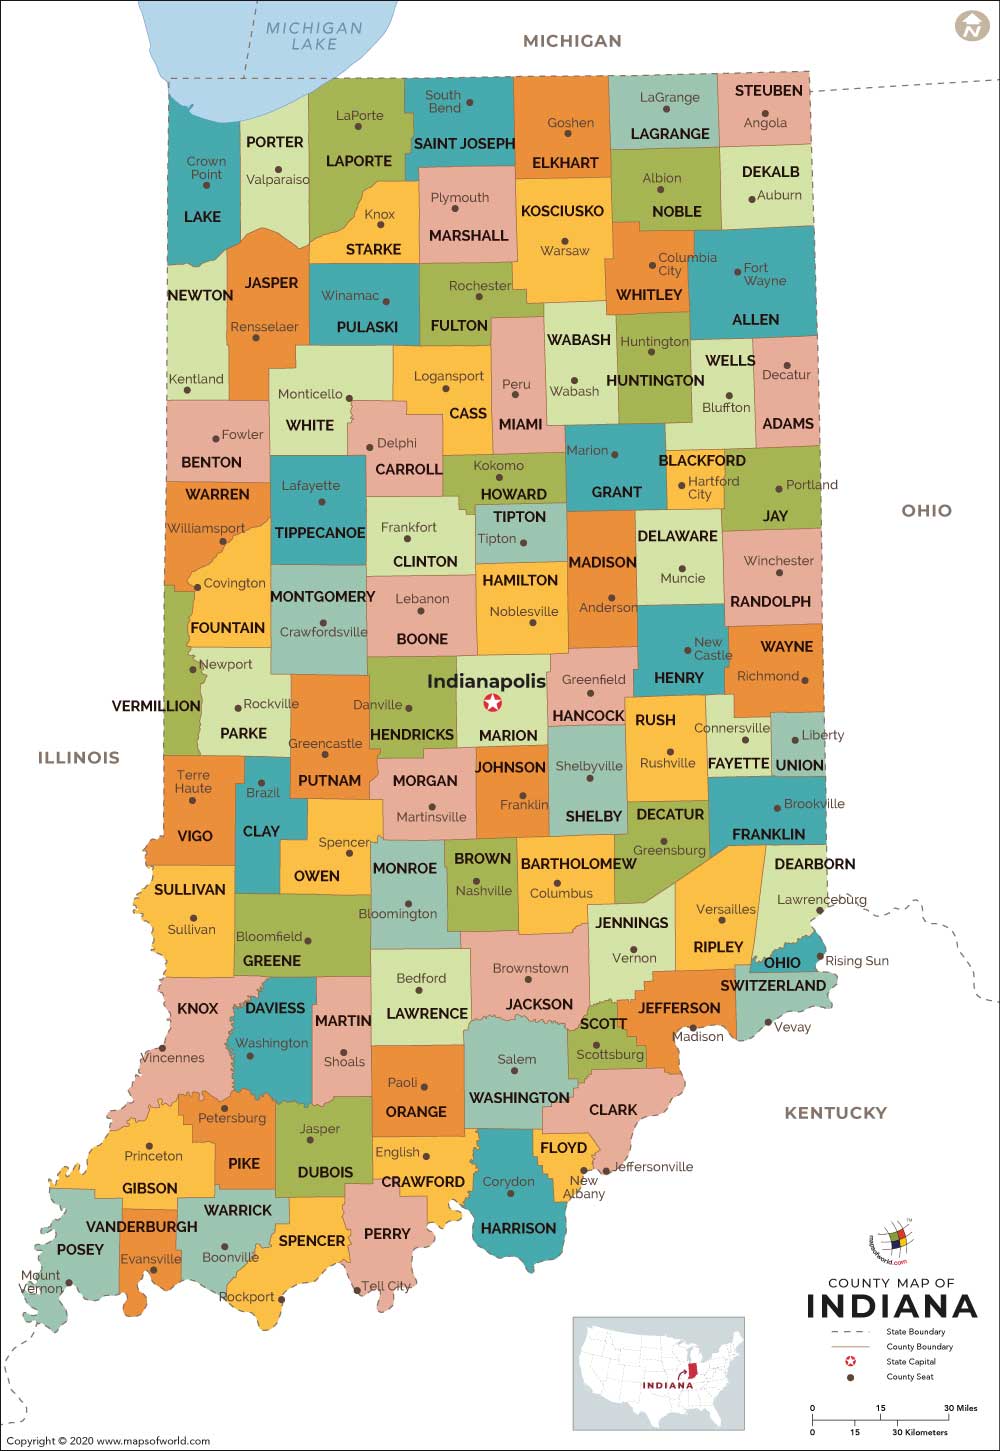 Indiana County Map With Names Wgcl News — Names Of Some Indiana Counties Have Troubled Past – Wgcl Am  1370 | 98.7Fm Bloomington Indiana's News Sports Talk Wgcl Radio